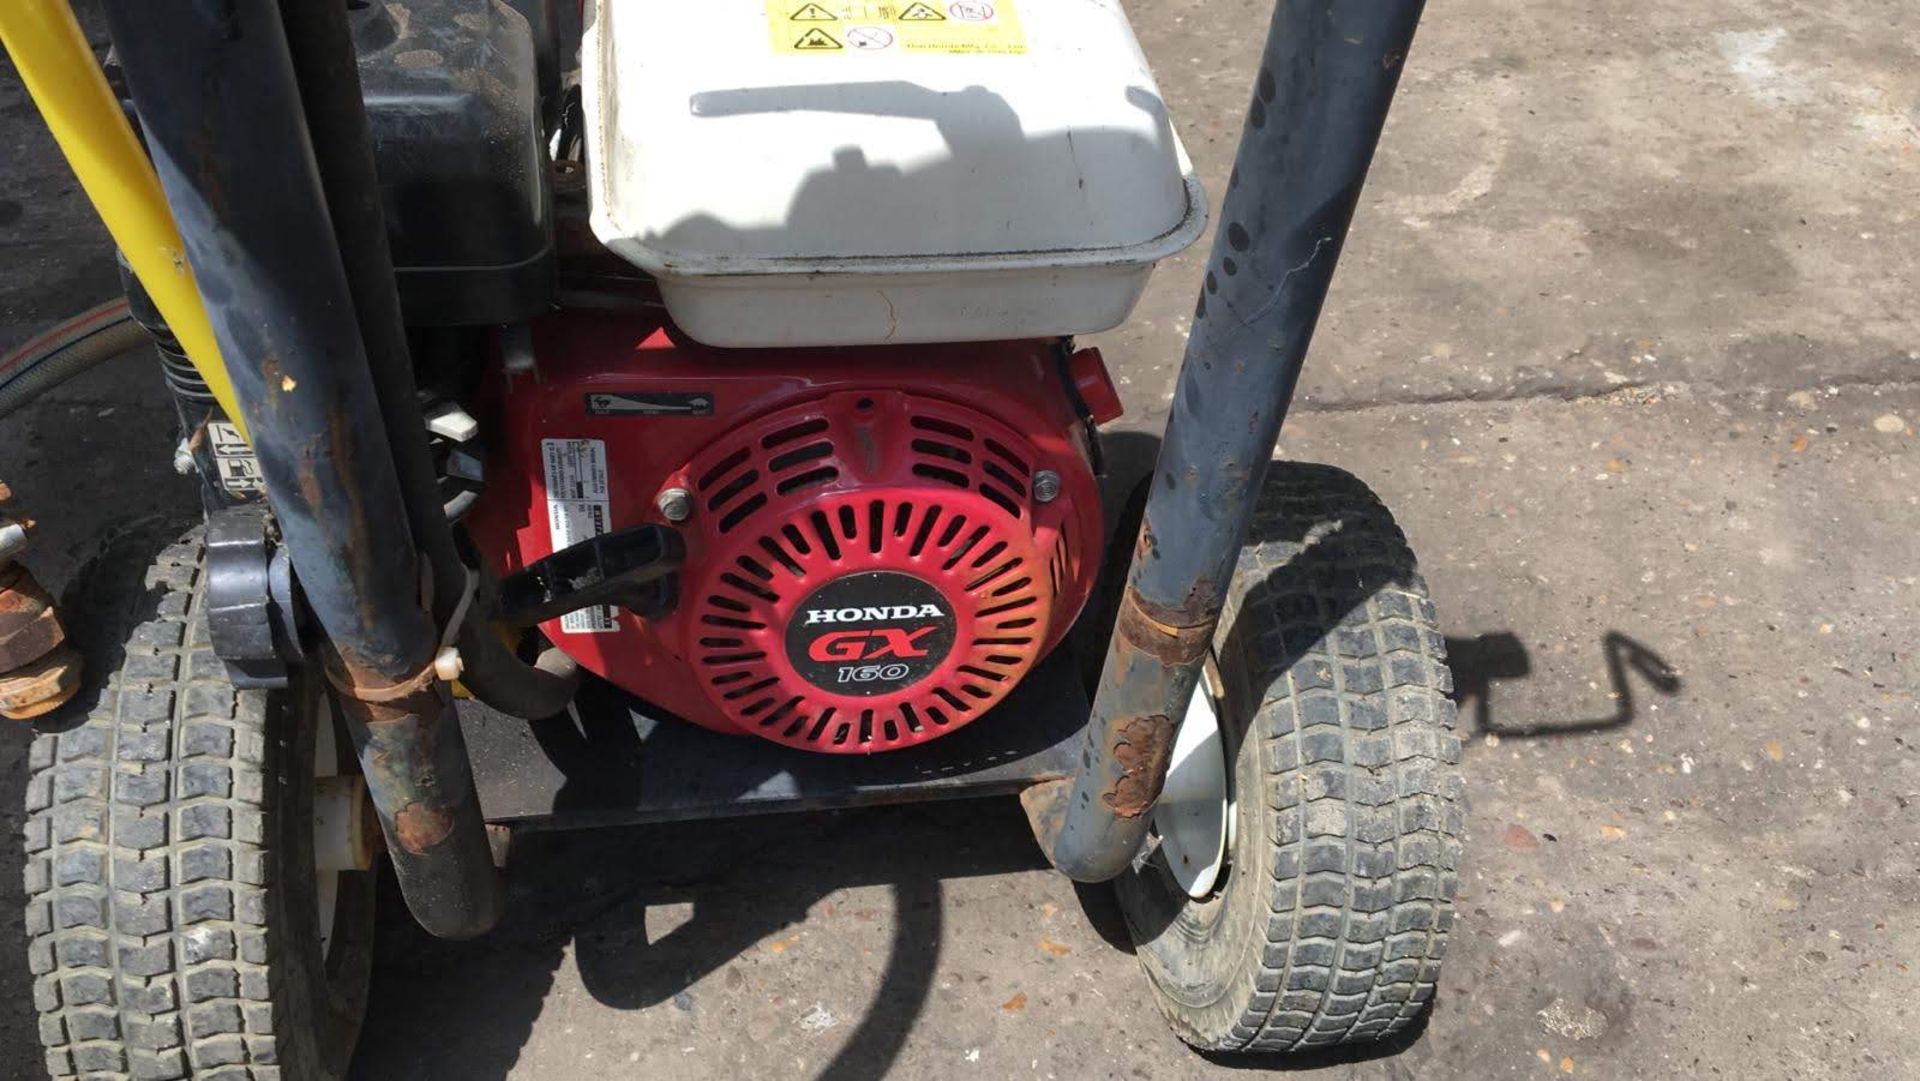 PUSHABLE POWER WASH SELF PRIMING, COMES WITH NEW LANCE, HONDA GX160 ENGINE *NO VAT* - Image 5 of 5